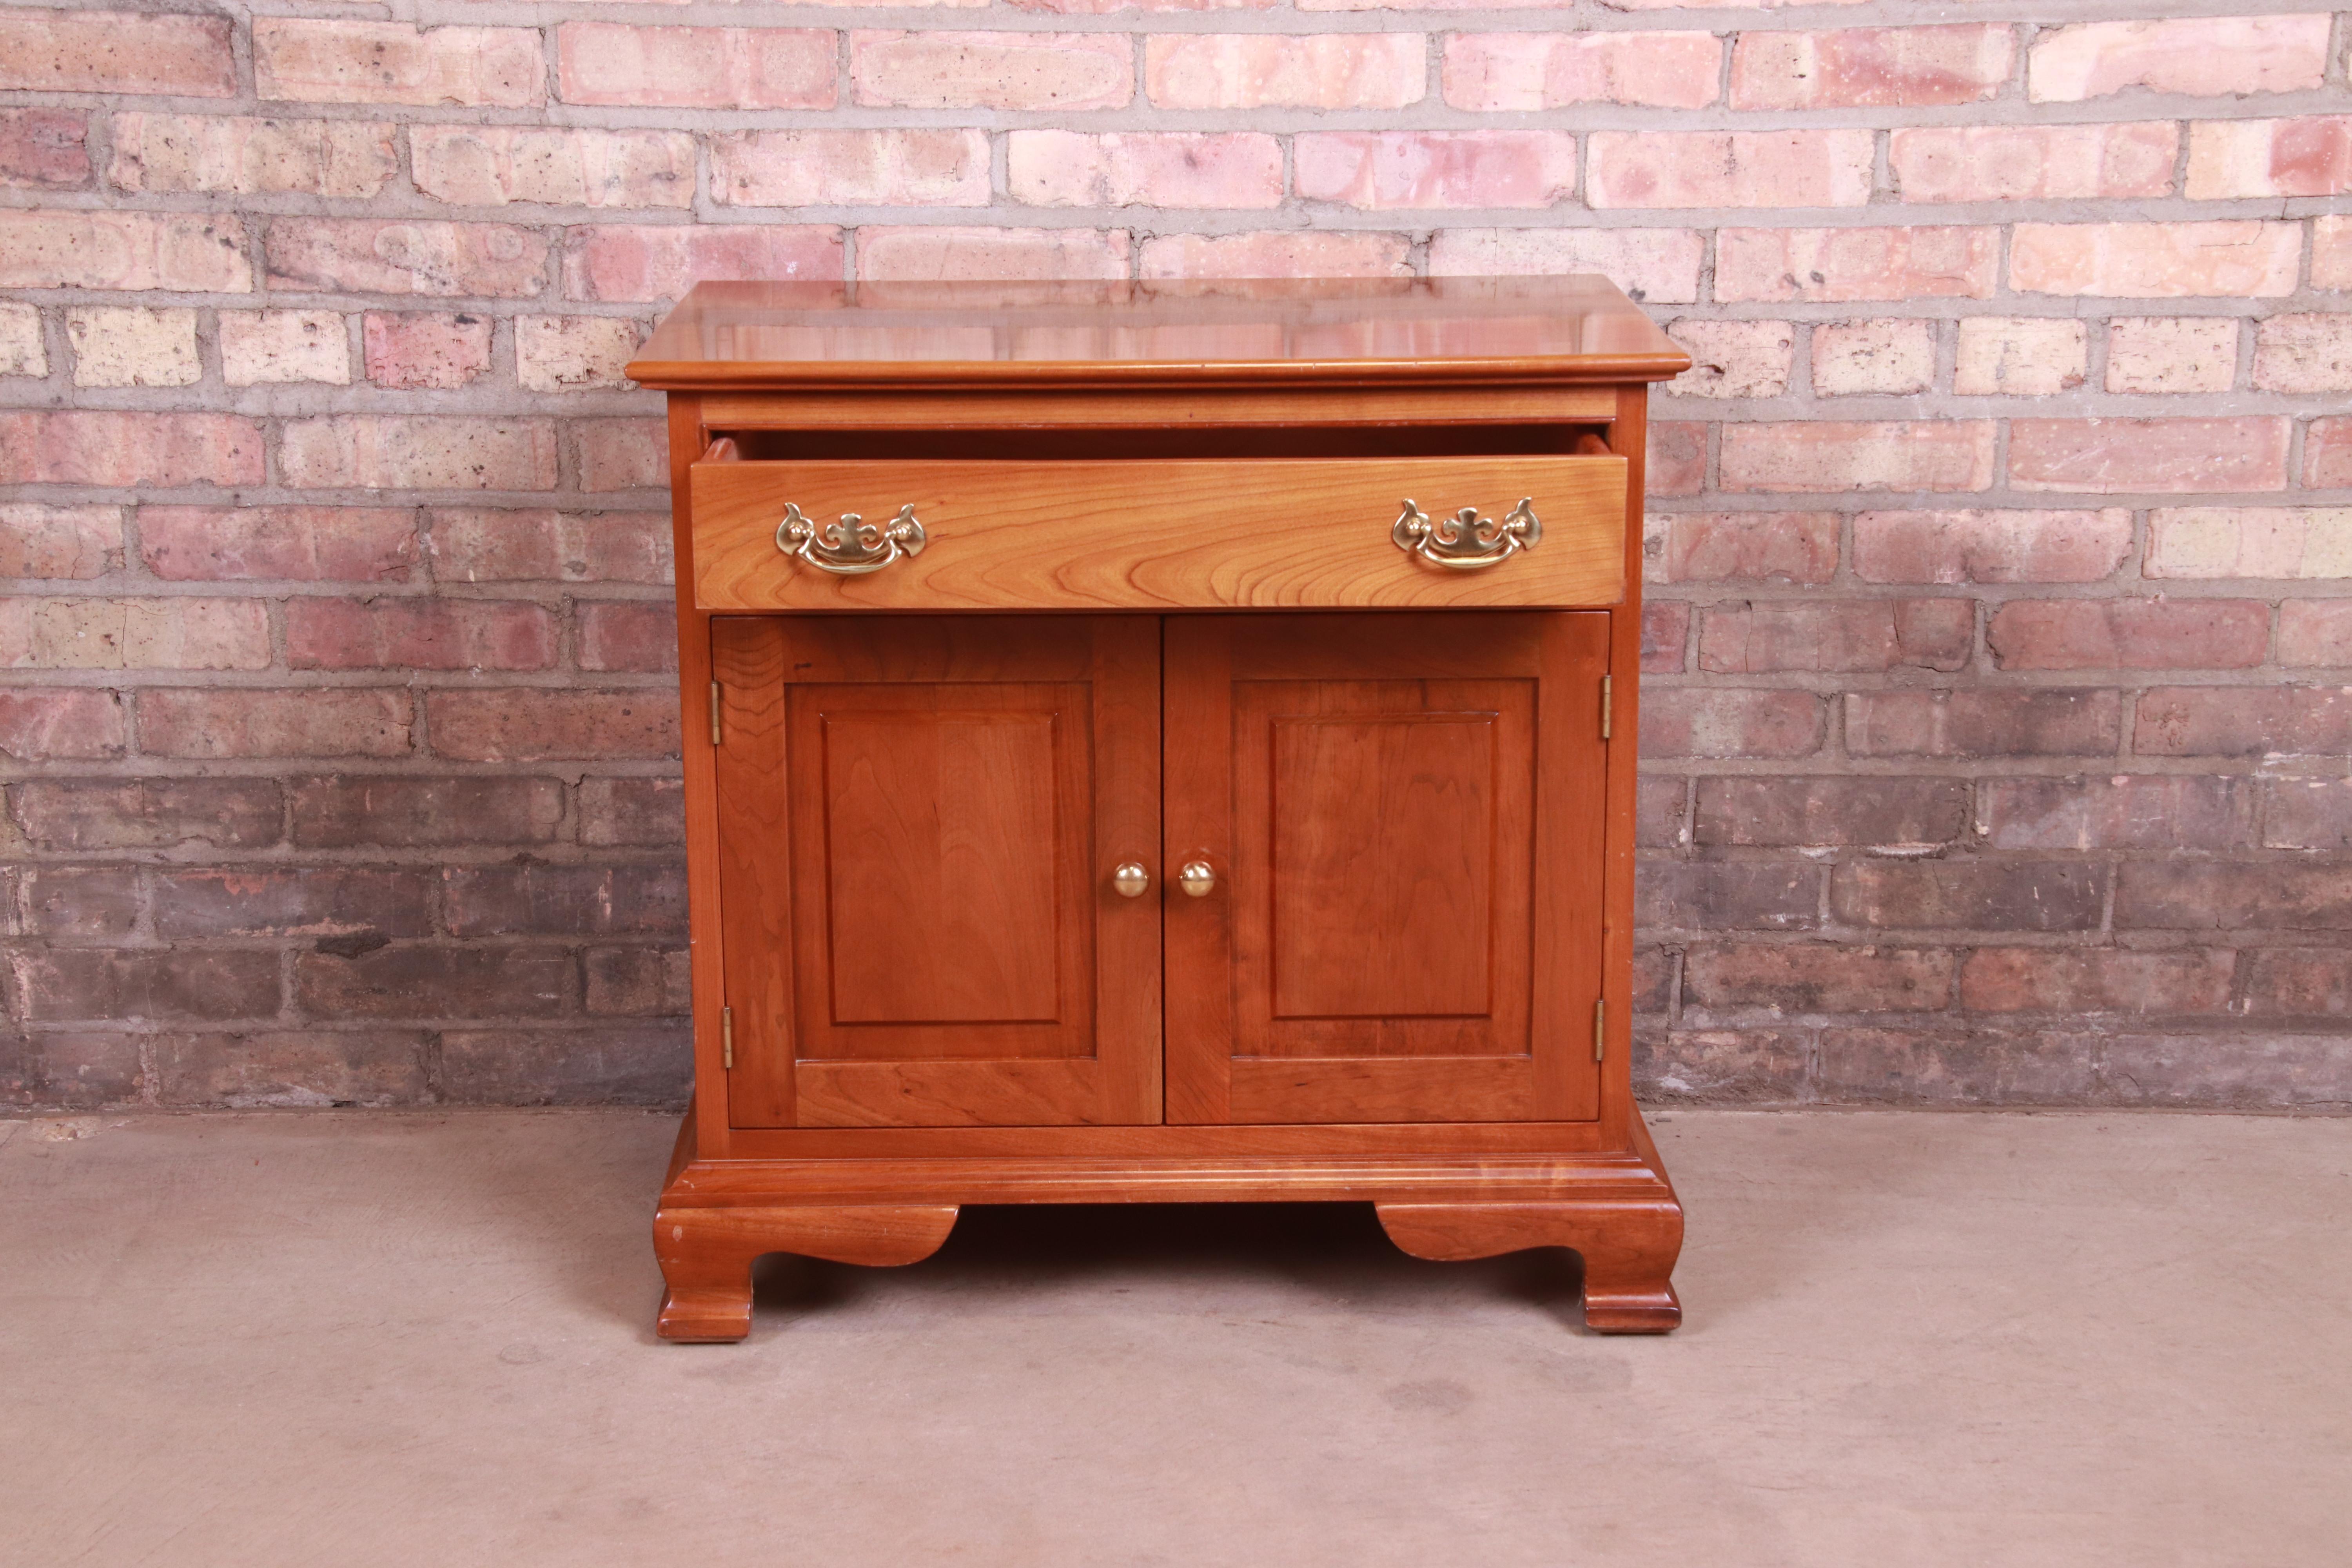 20th Century Stickley American Colonial Solid Cherry Wood Nightstand, Circa 1950s